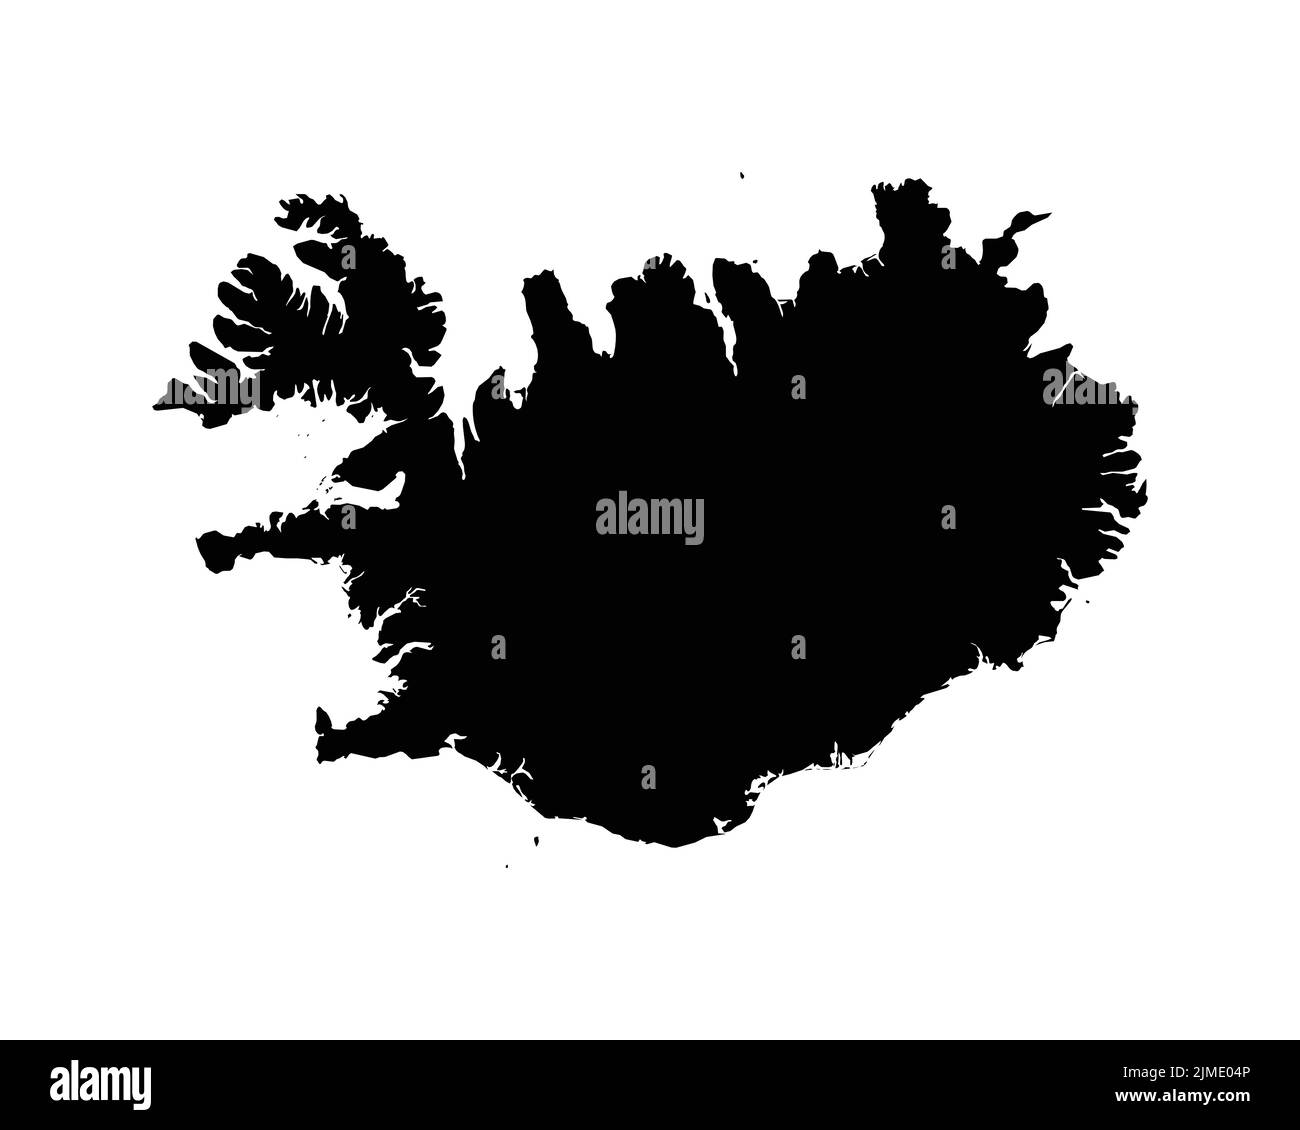 Iceland Map. Icelandic Country Map. Icelander Black and White National Nation Outline Geography Border Boundary Shape Territory Vector Illustration EP Stock Vector